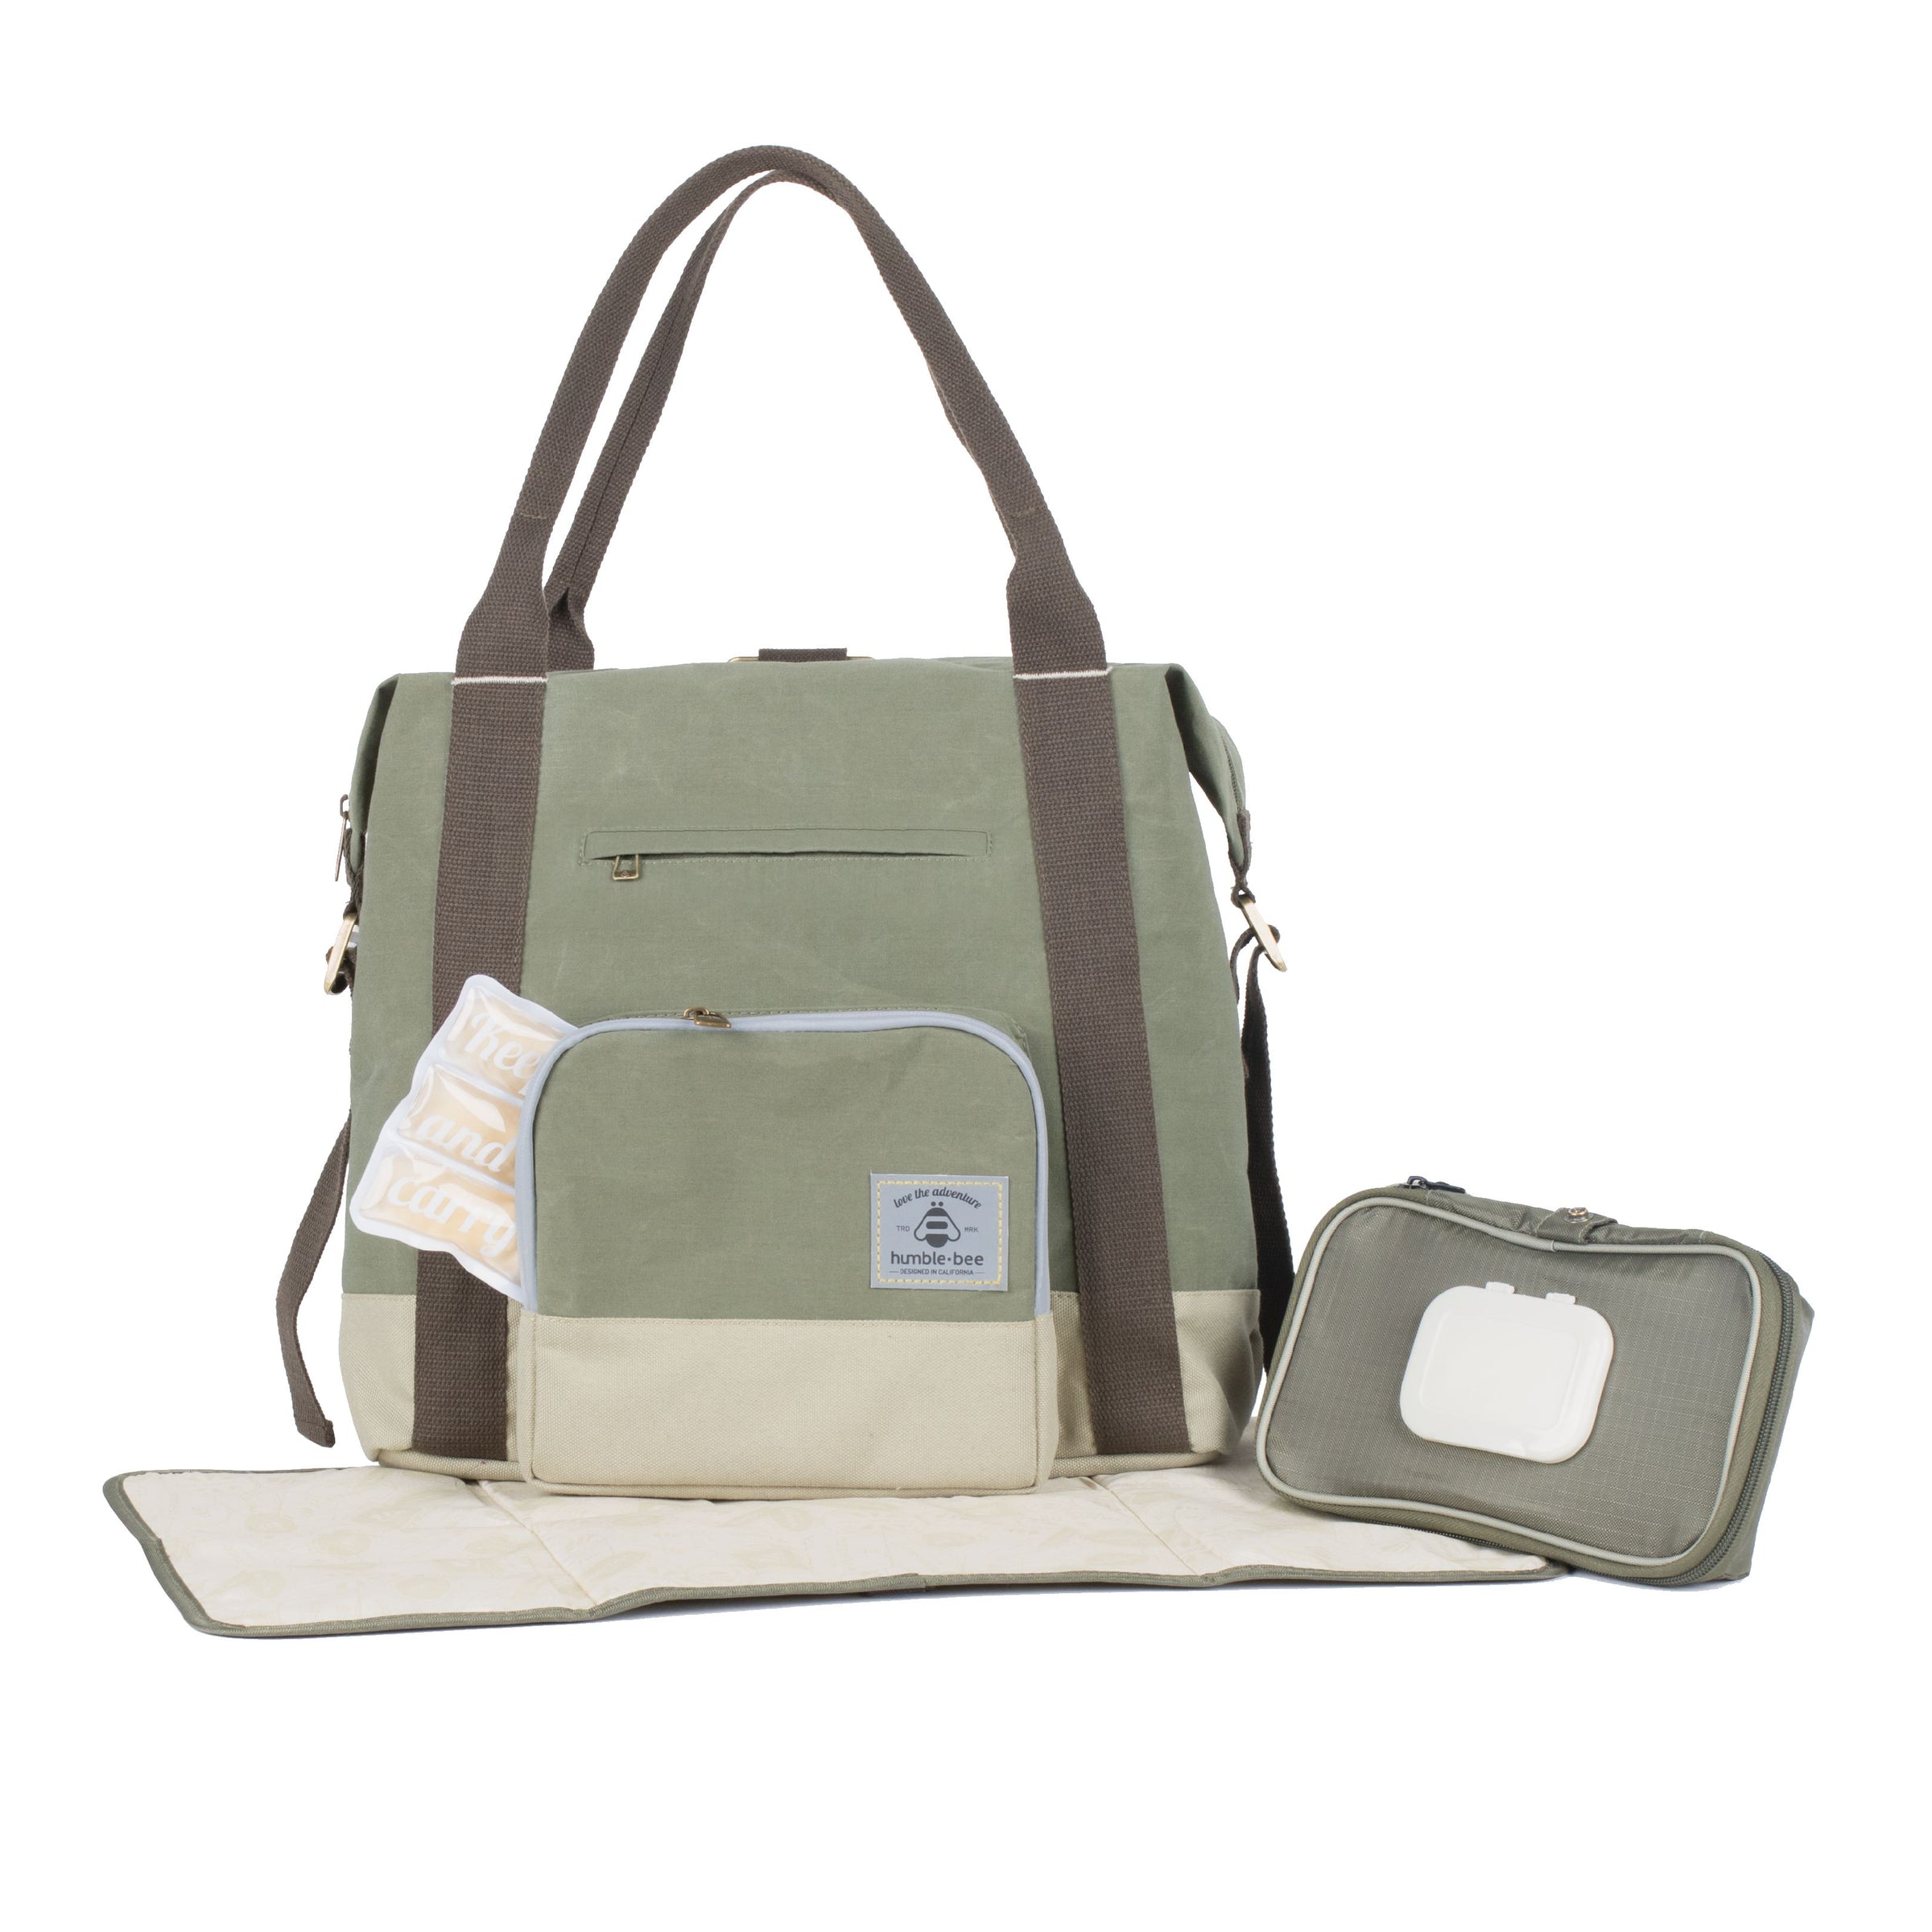 All Heart Diaper Bag in Olive Dusk - Project Nursery